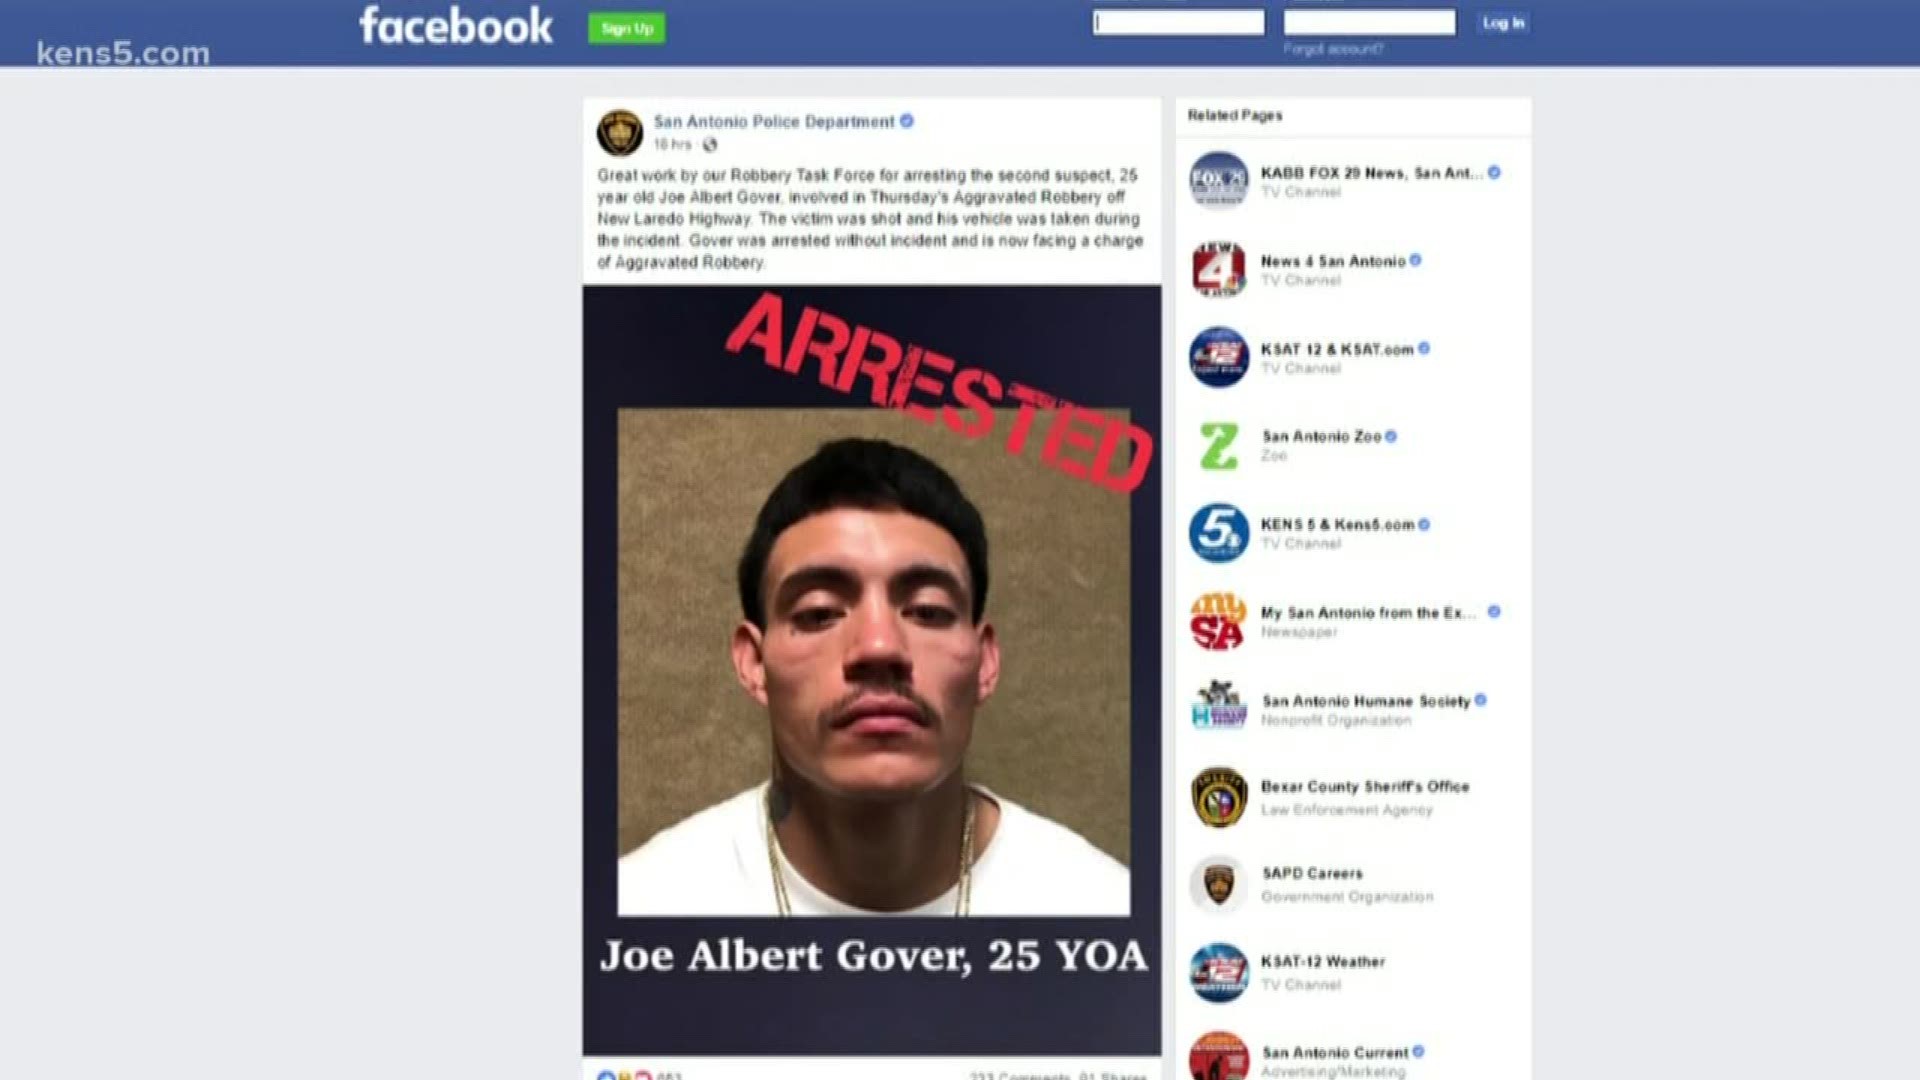 A second arrest was made in the shooting and carjacking of an Uber driver on Thursday. Detectives allege 25-year-old Joe Albert Gover is one of two men who attacked Kim Troy Williams in the 7400 block of New Laredo Highway, after using an Uber gift card to arrange for a rideshare pickup by Williams.